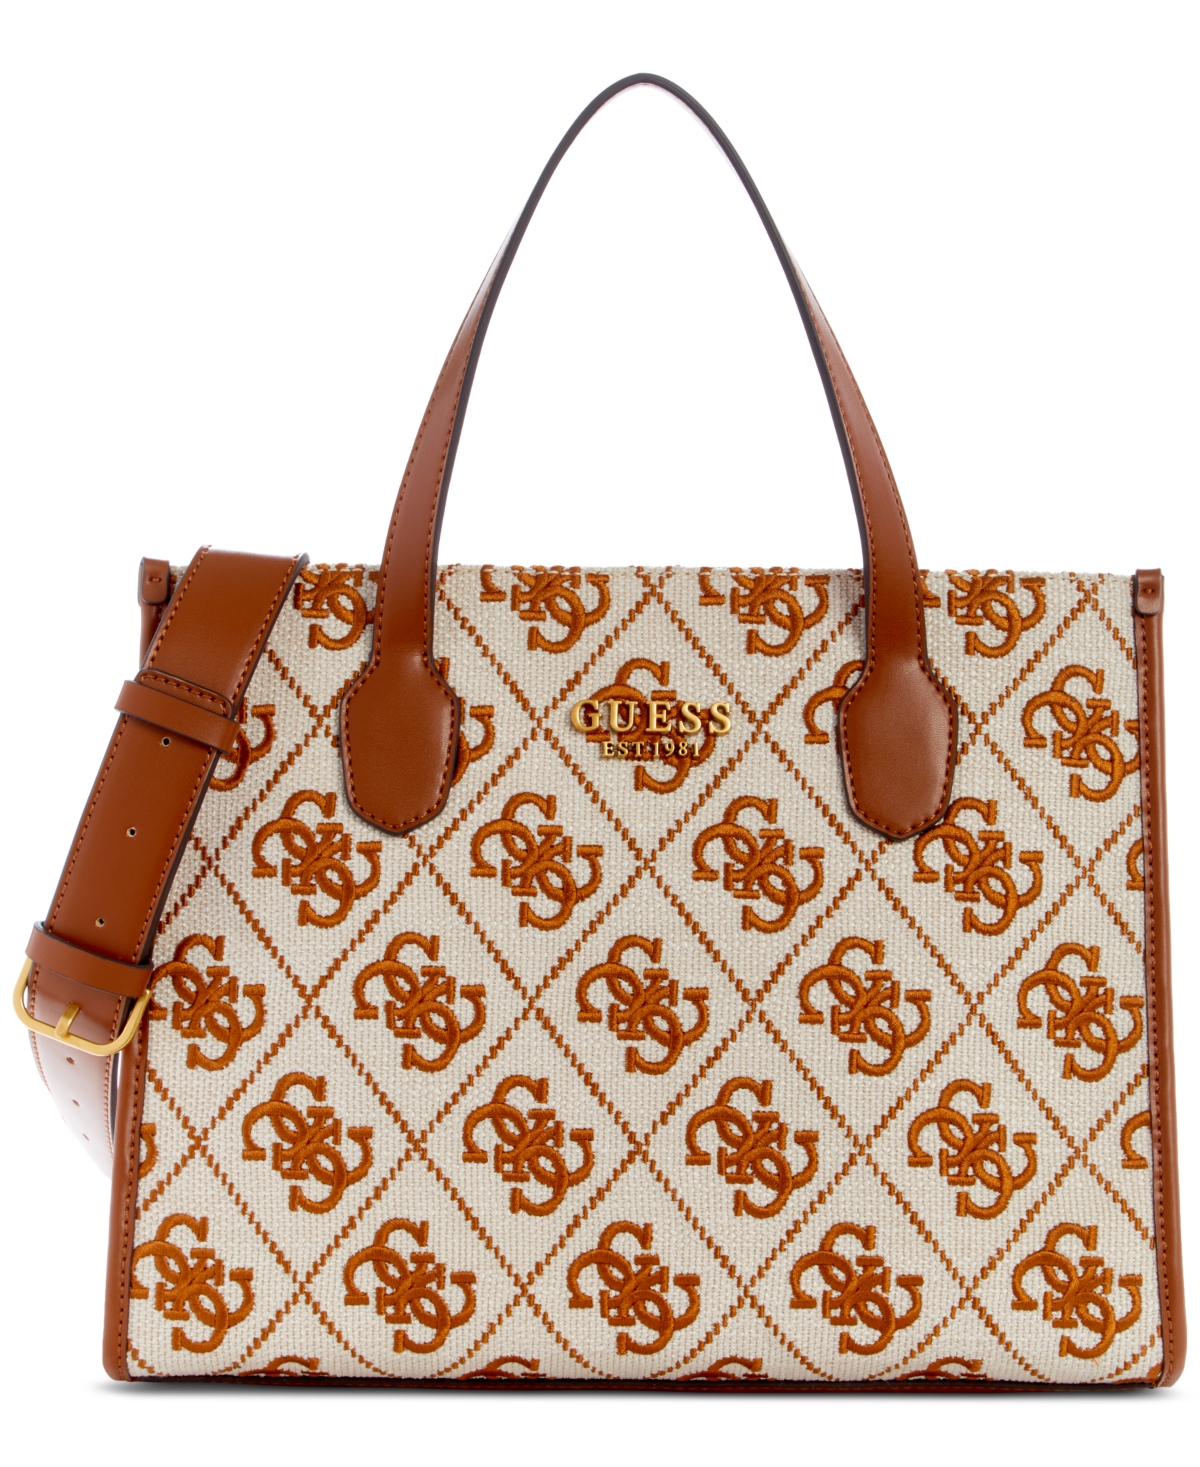 Women's GUESS Totes Sale, Up To 70% Off